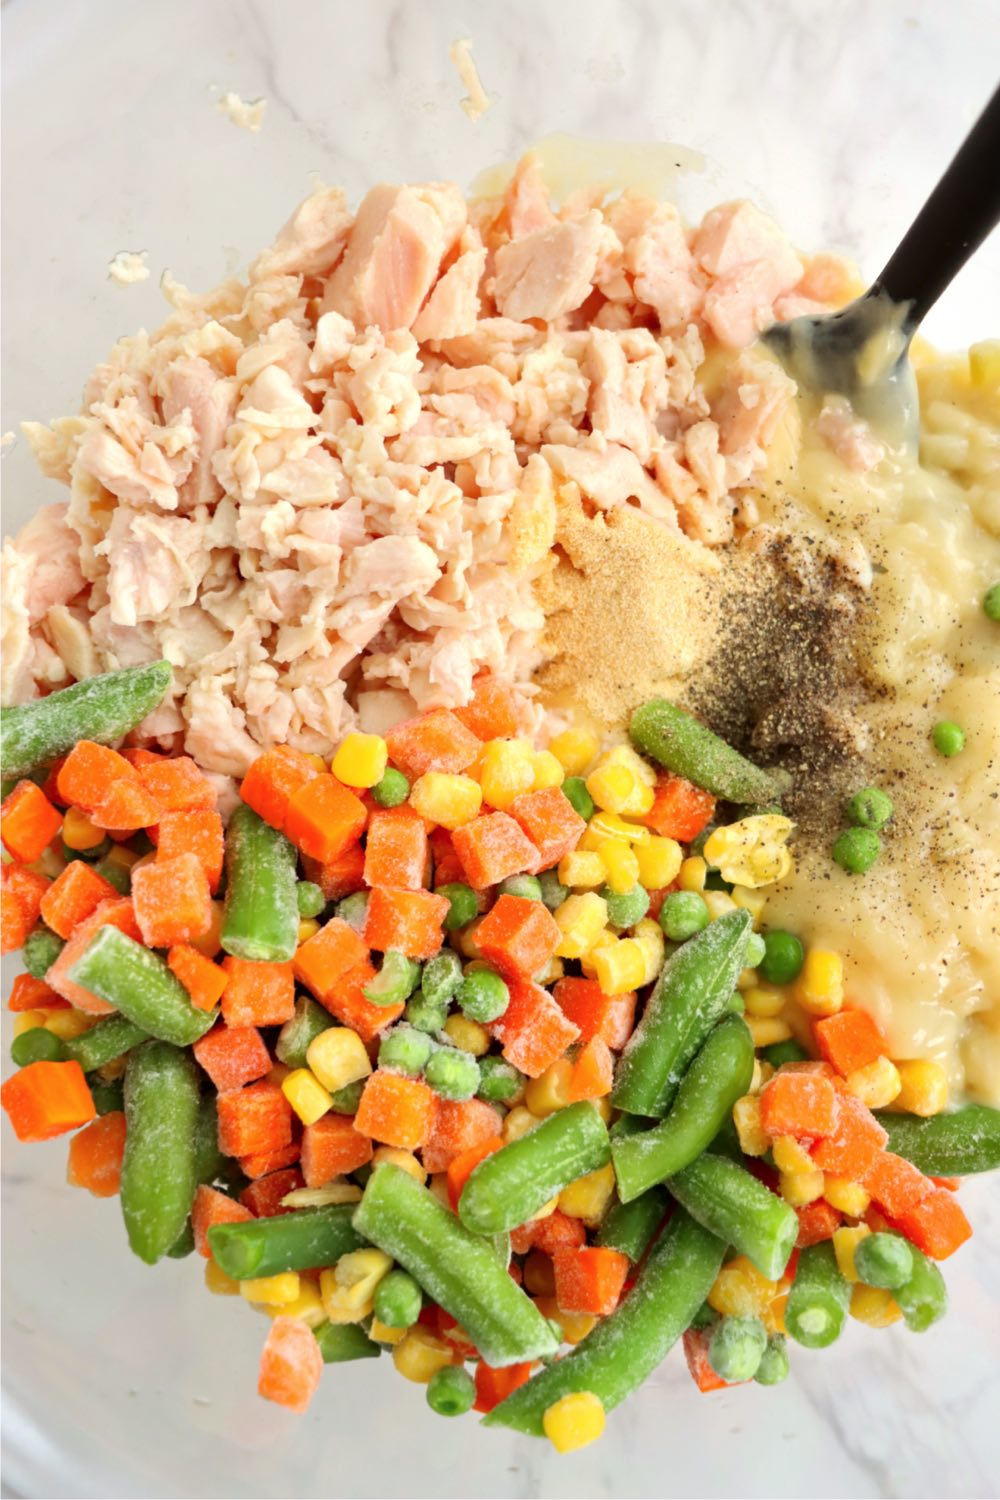 Chicken, mixed vegetables and seasonings in a bowl